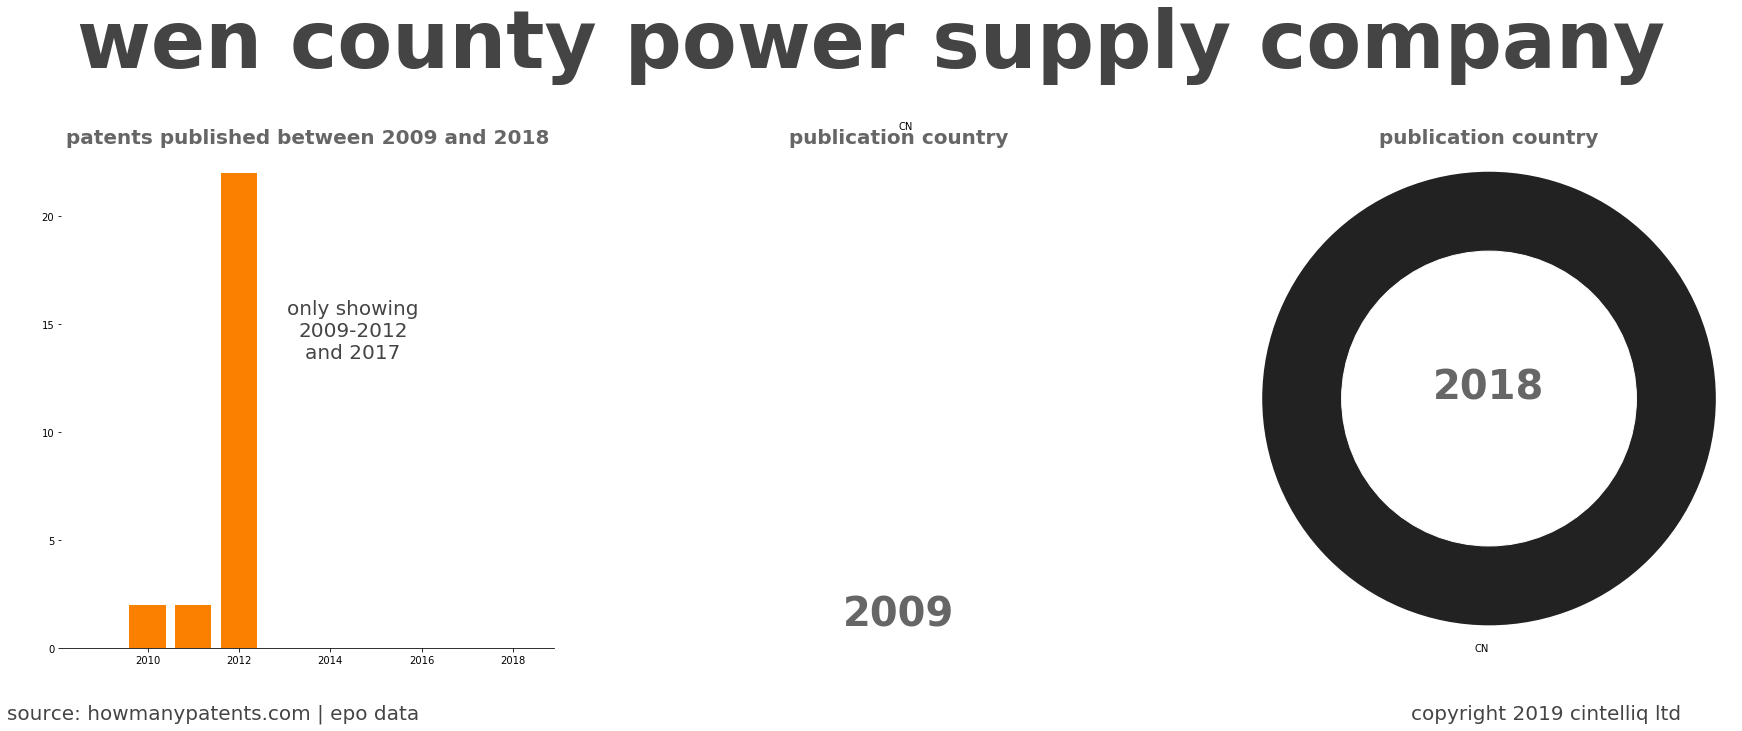 summary of patents for Wen County Power Supply Company